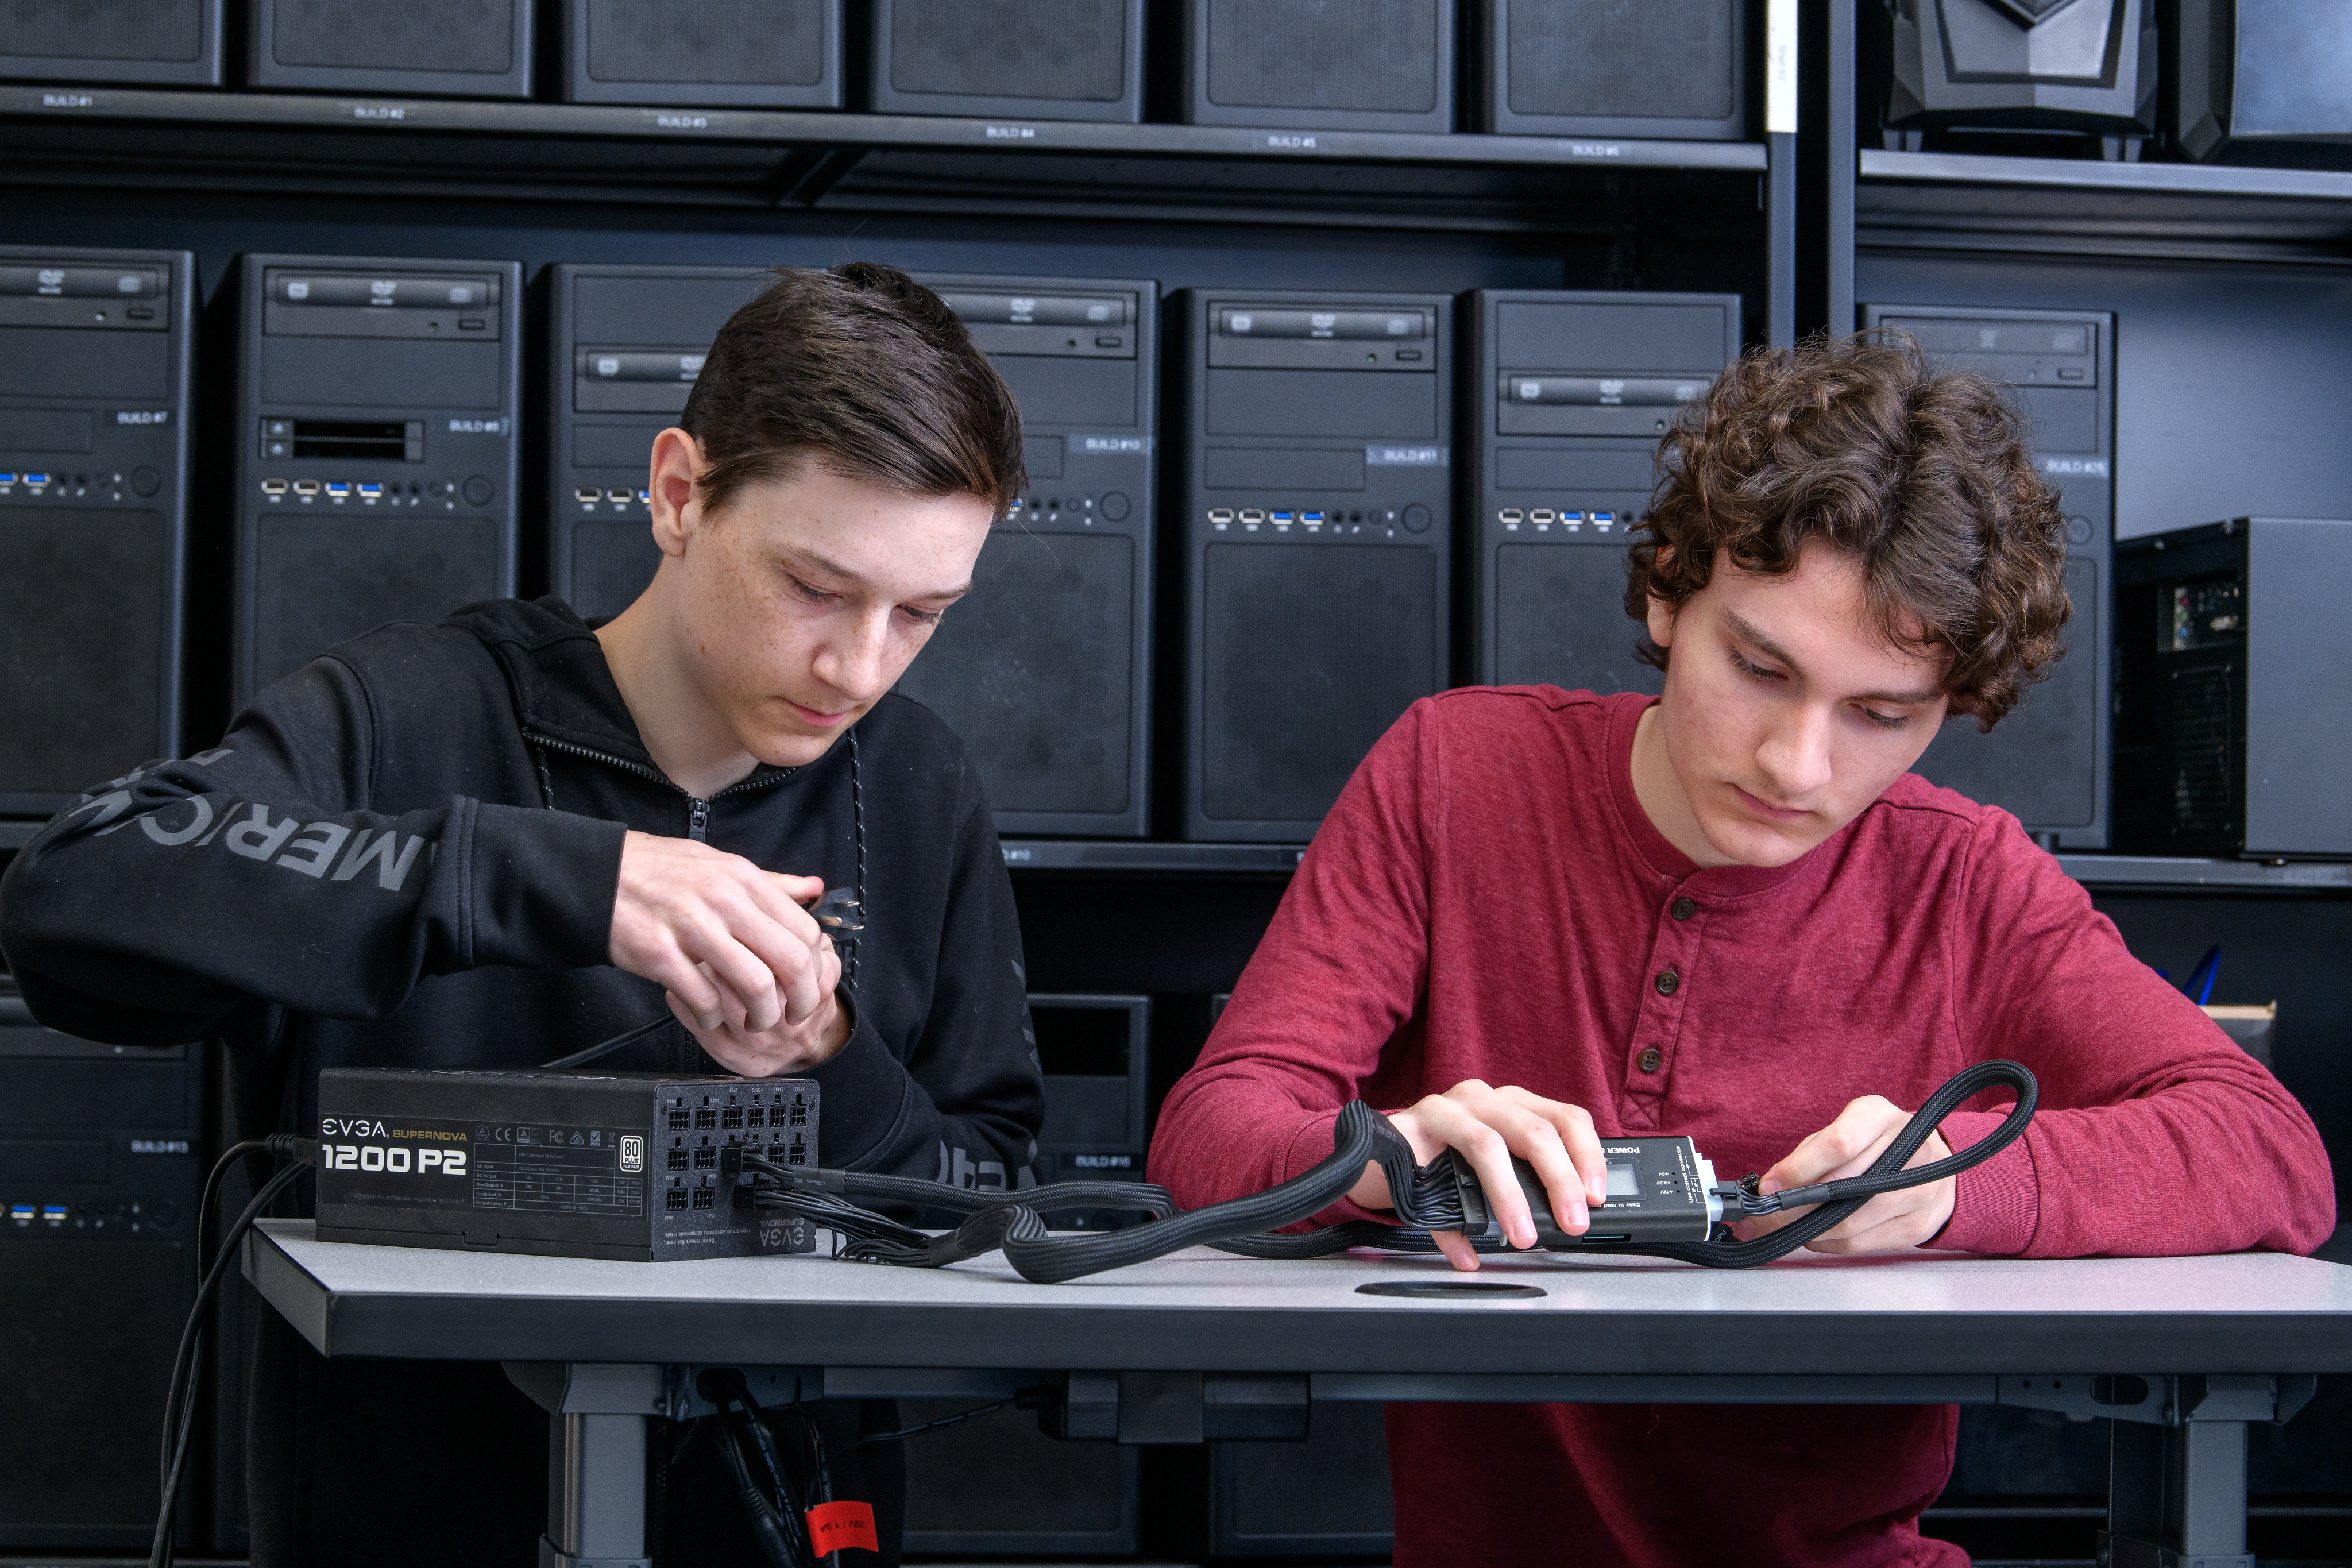 Two male Cybersecurity students work on equipment in their lab.